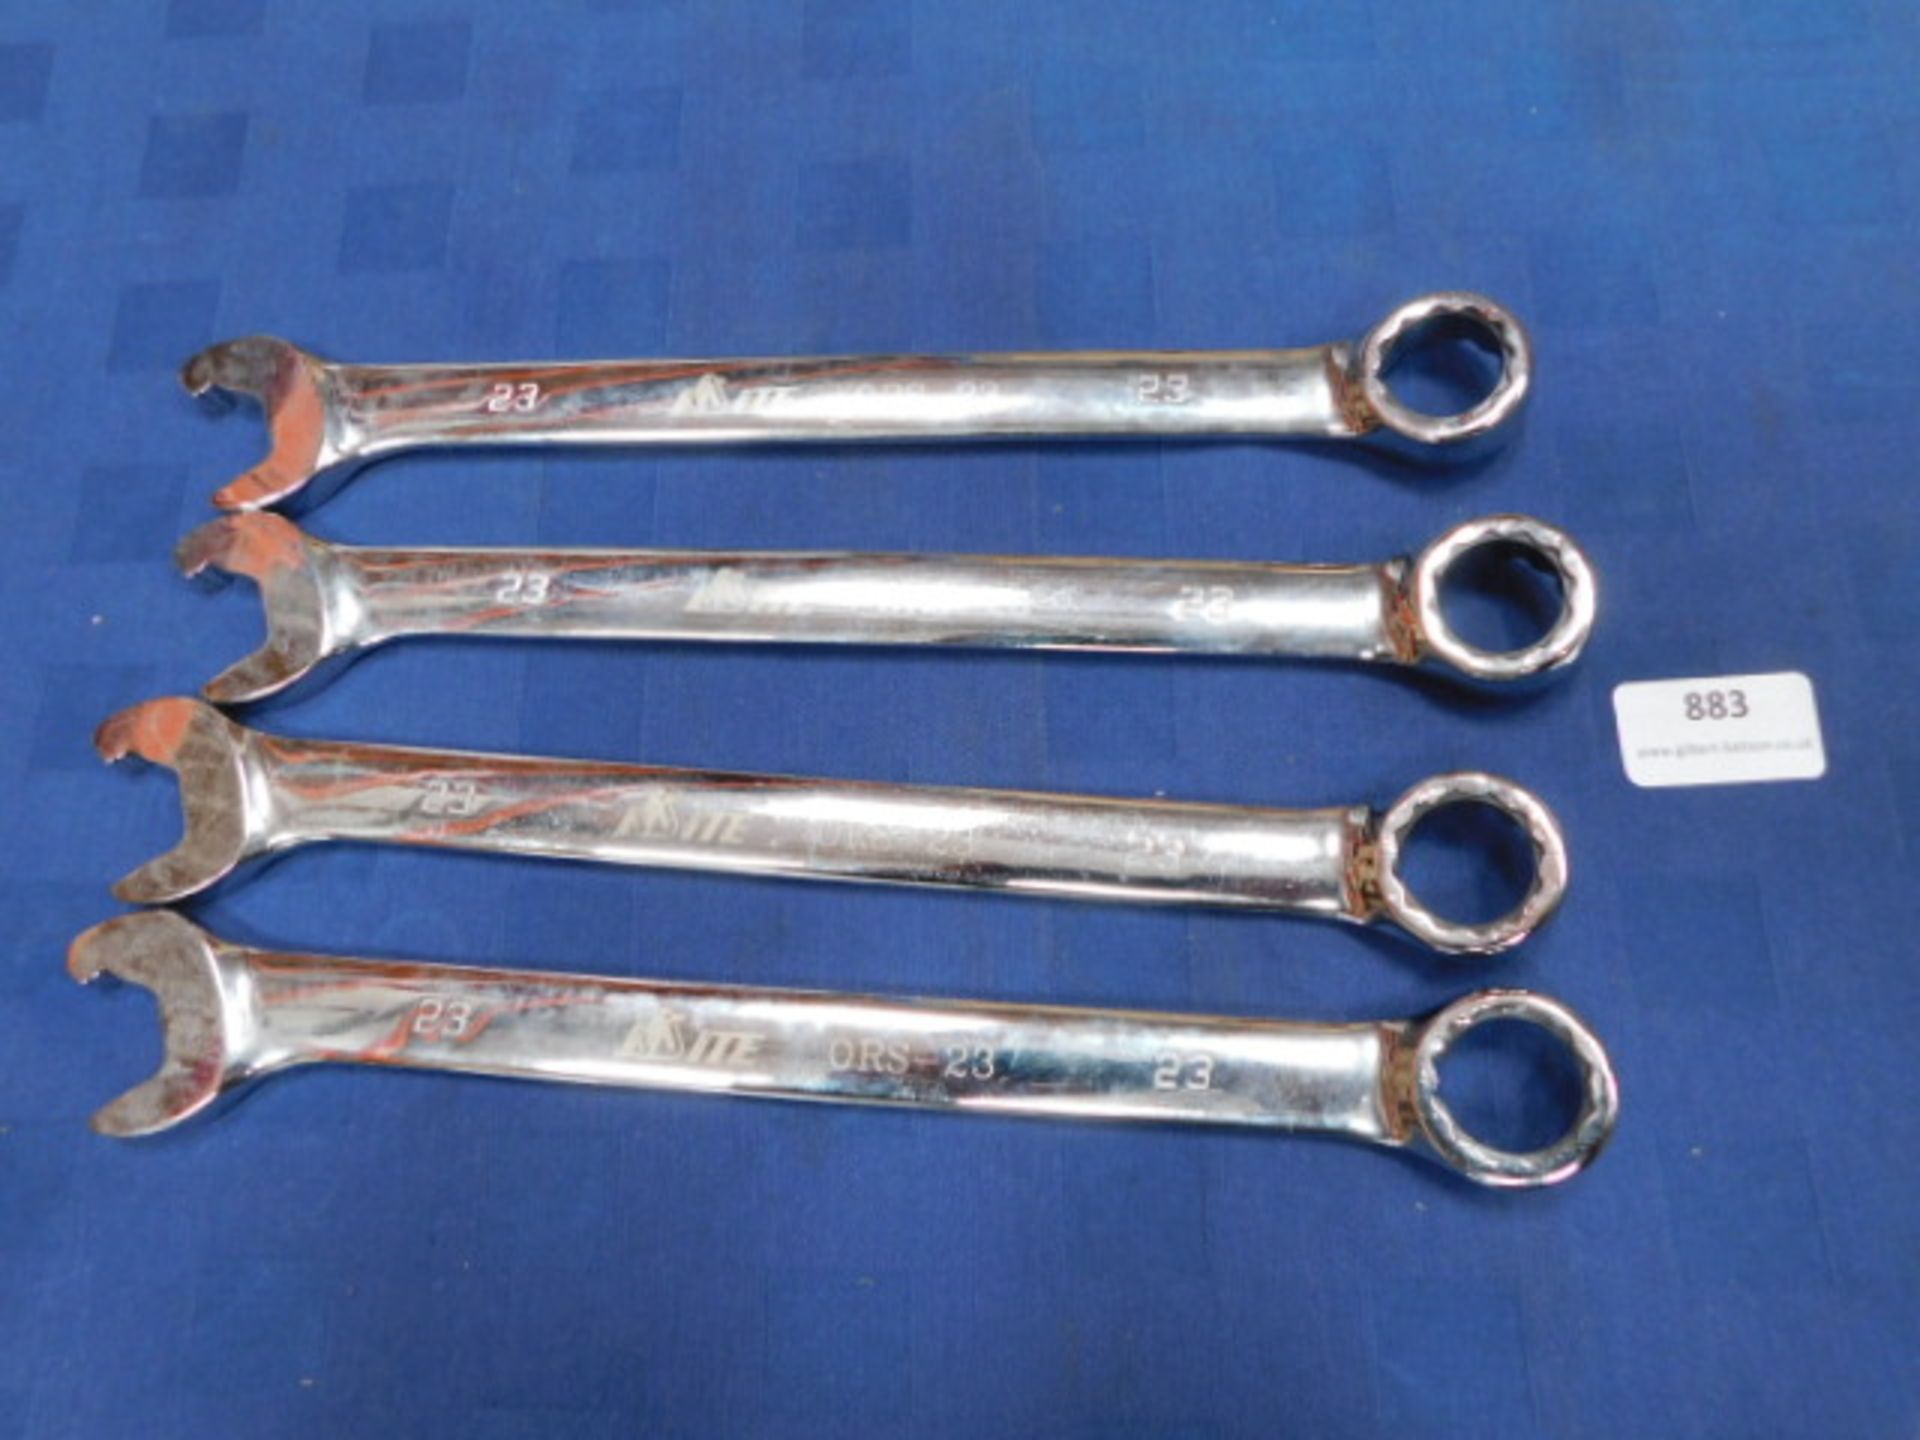 * 4x 23mm Spanners